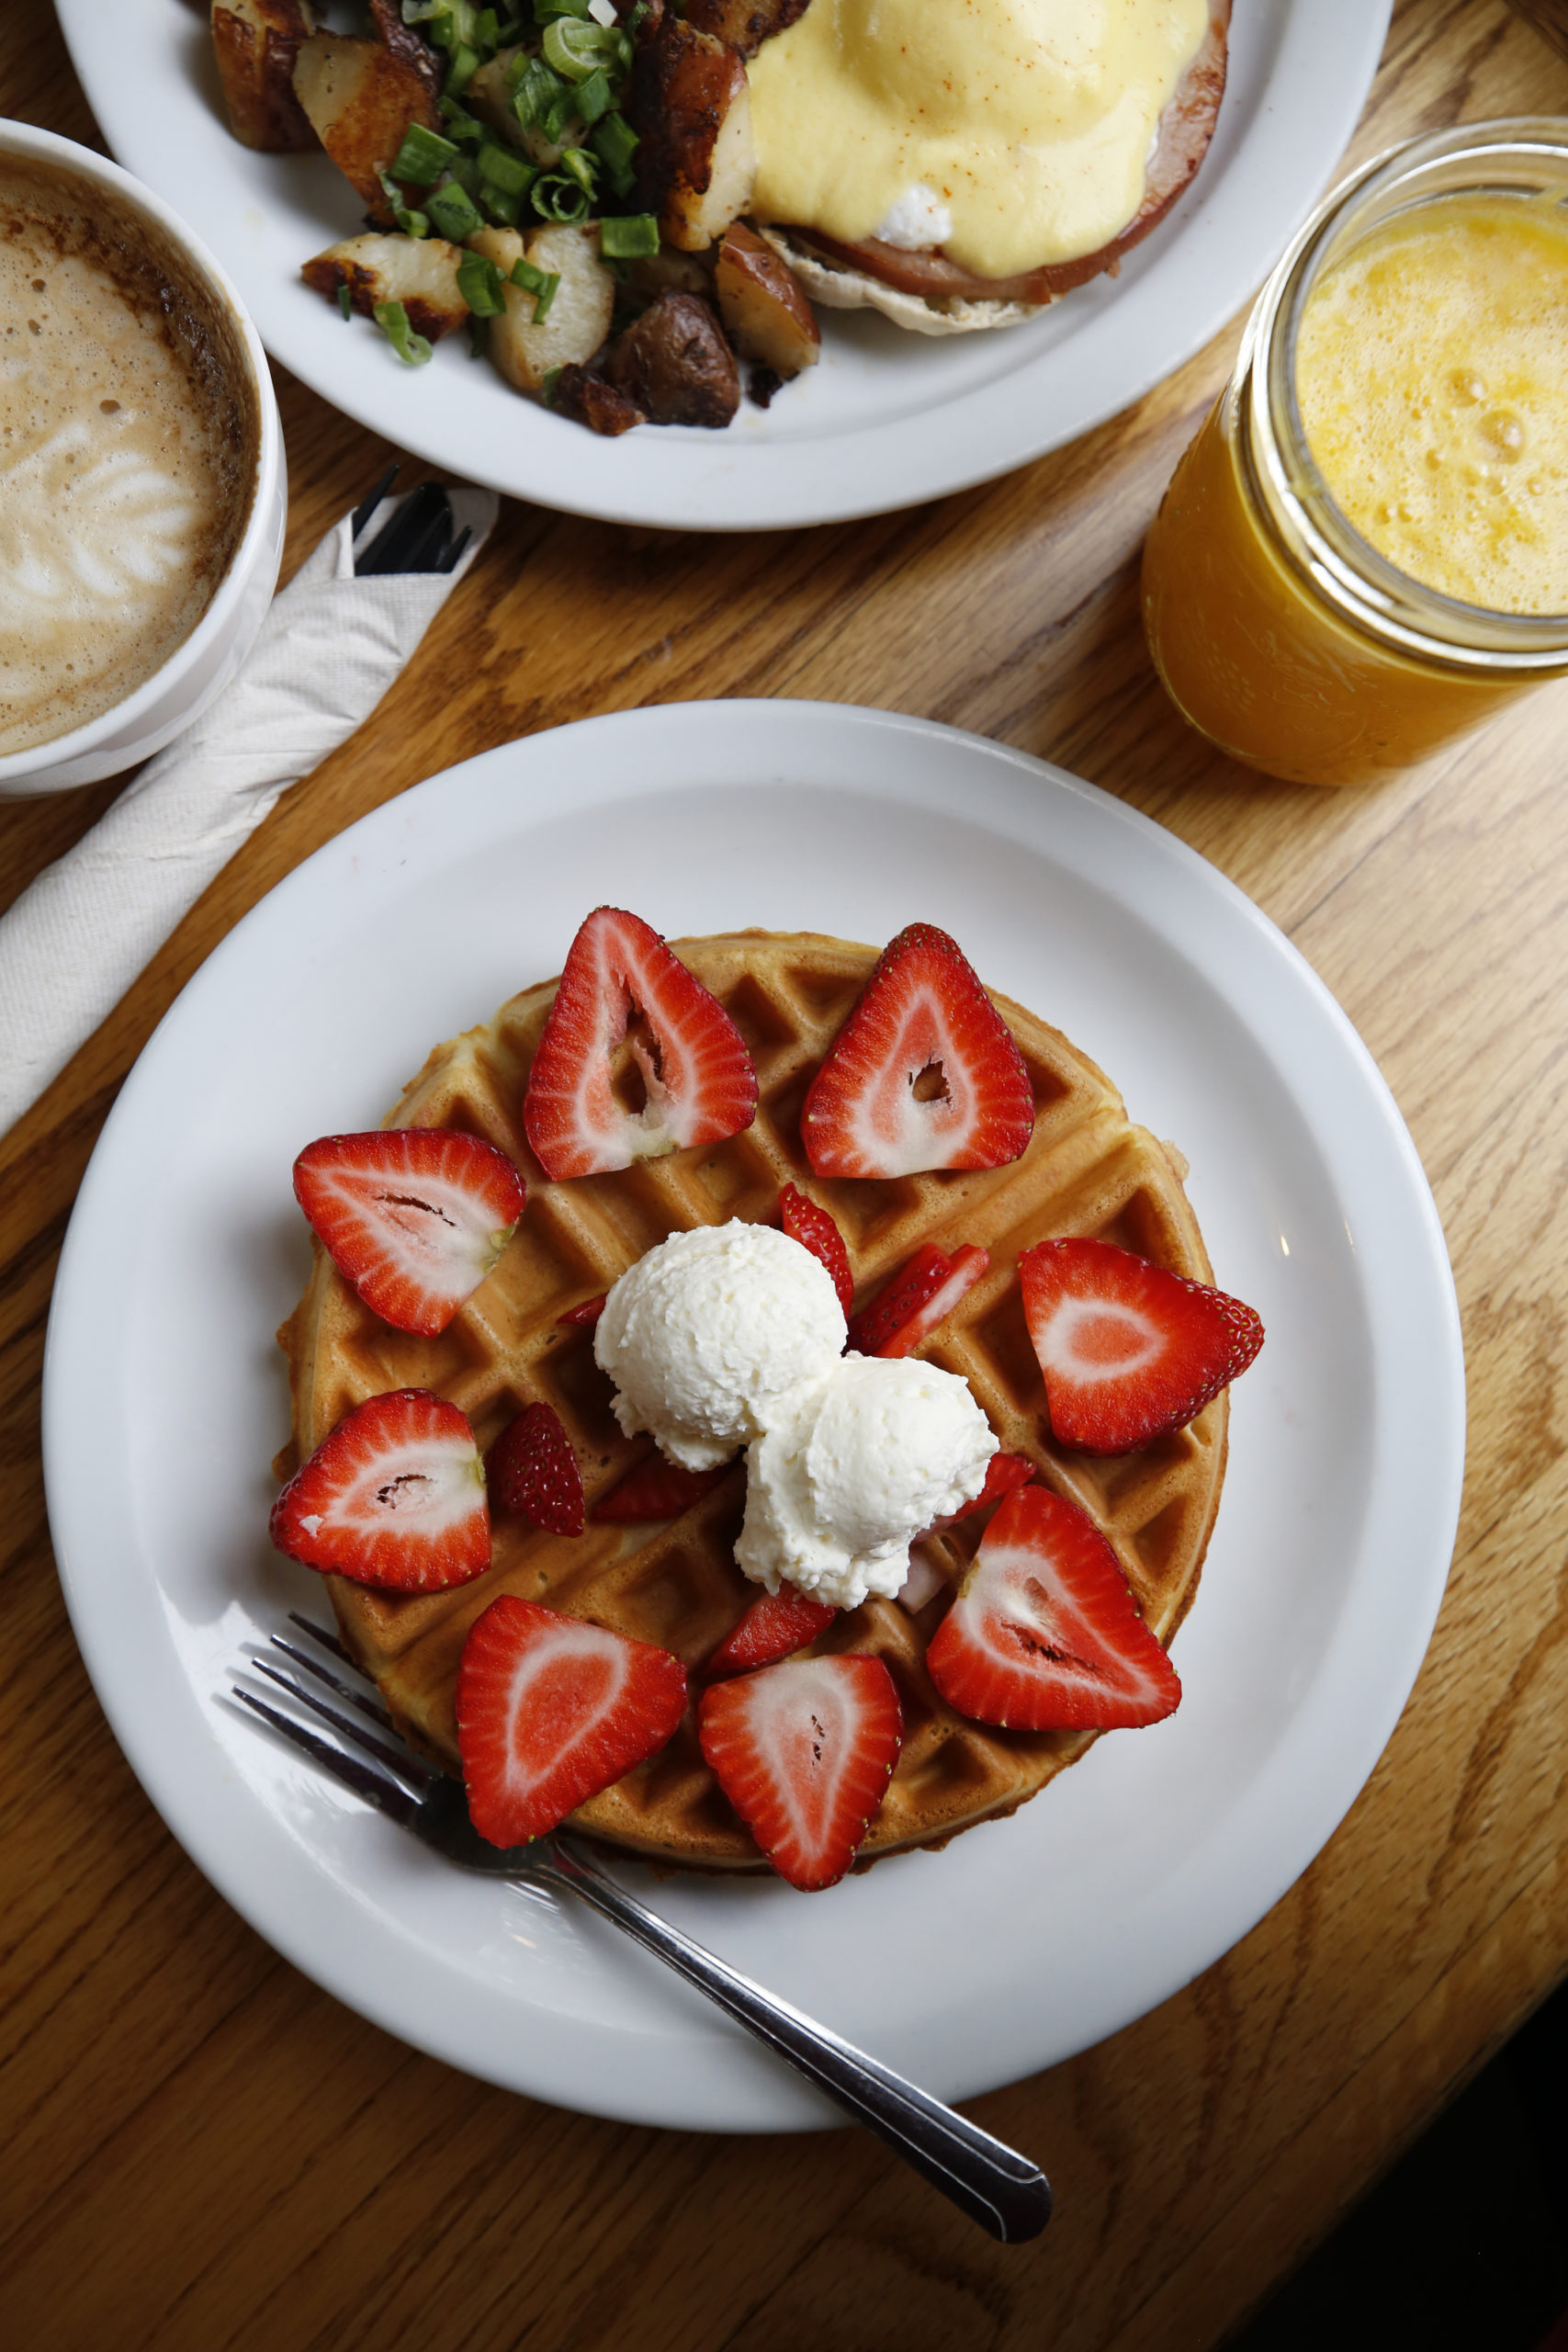 The Belgian waffle with strawberries and cream, the original Eggs Benedict, freshly squeezed orange juice and a cappuccino at the Howard Station Cafe in Occidental, Calif., on Thursday, May 13, 2021. (Beth Schlanker/Sonoma Magazine)